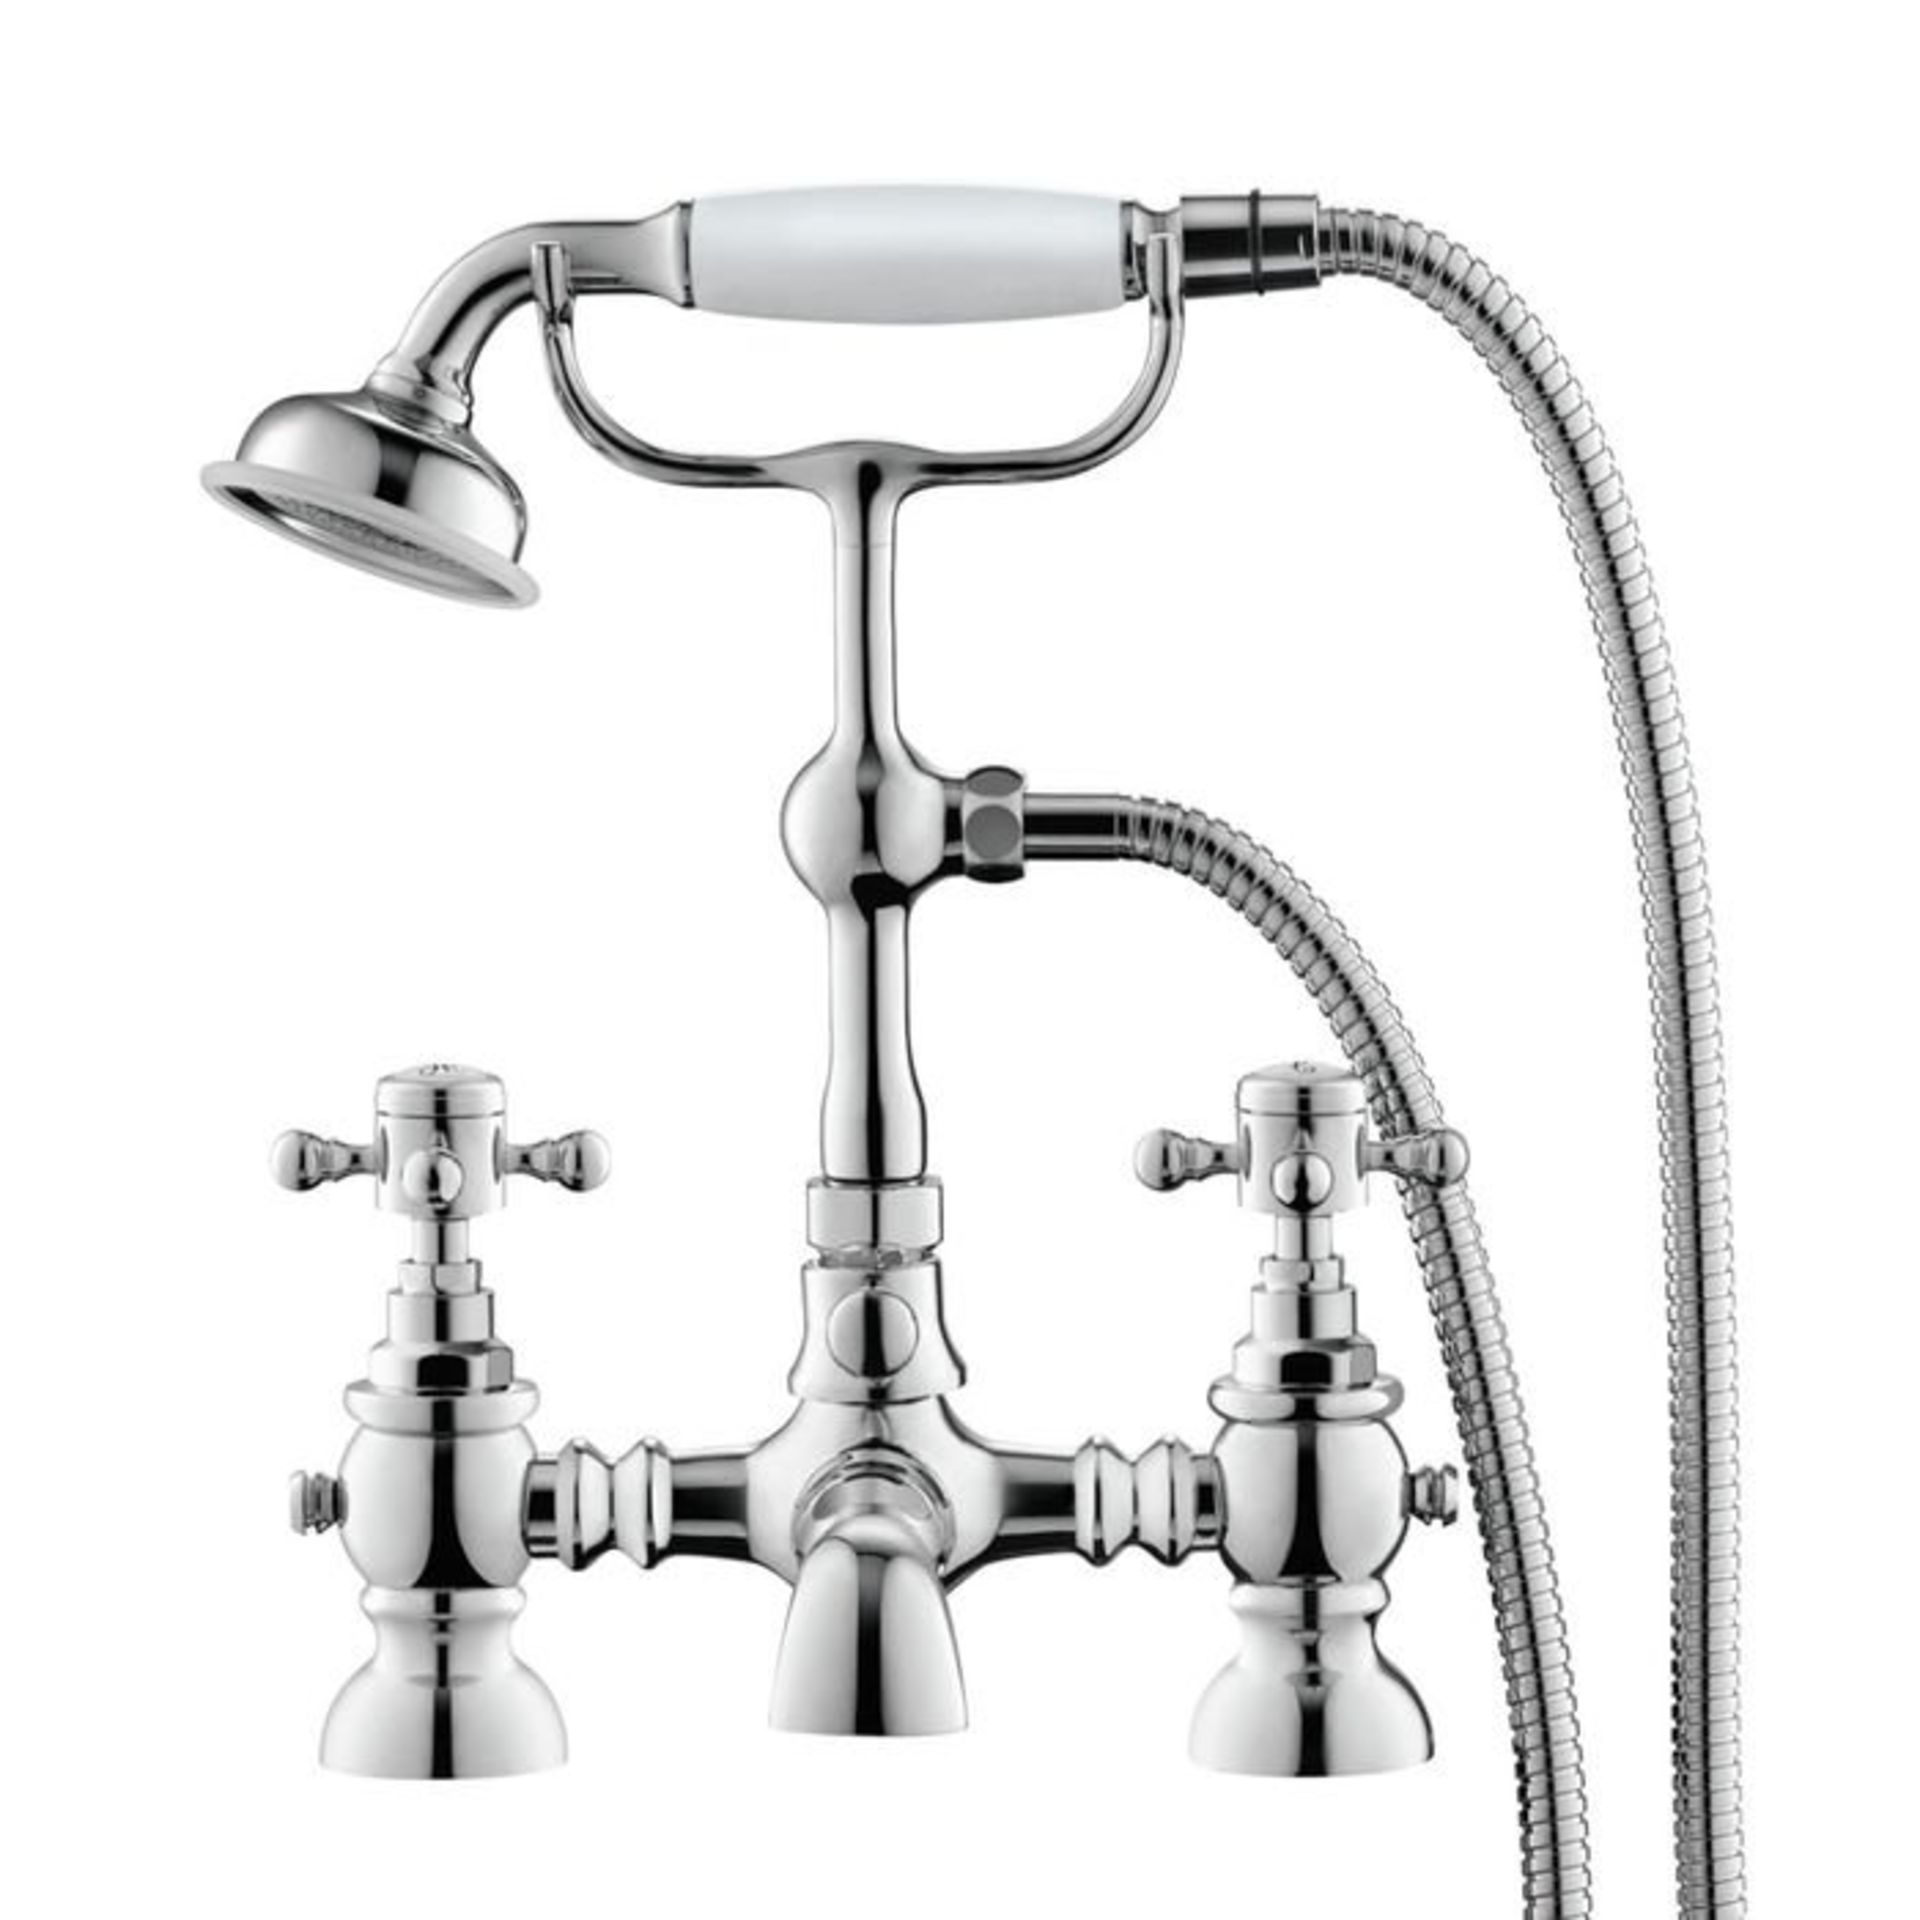 (S32) Victoria II Bath Shower Mixer - Traditional Tap with Hand Held Shower RRP £165.99 We love this